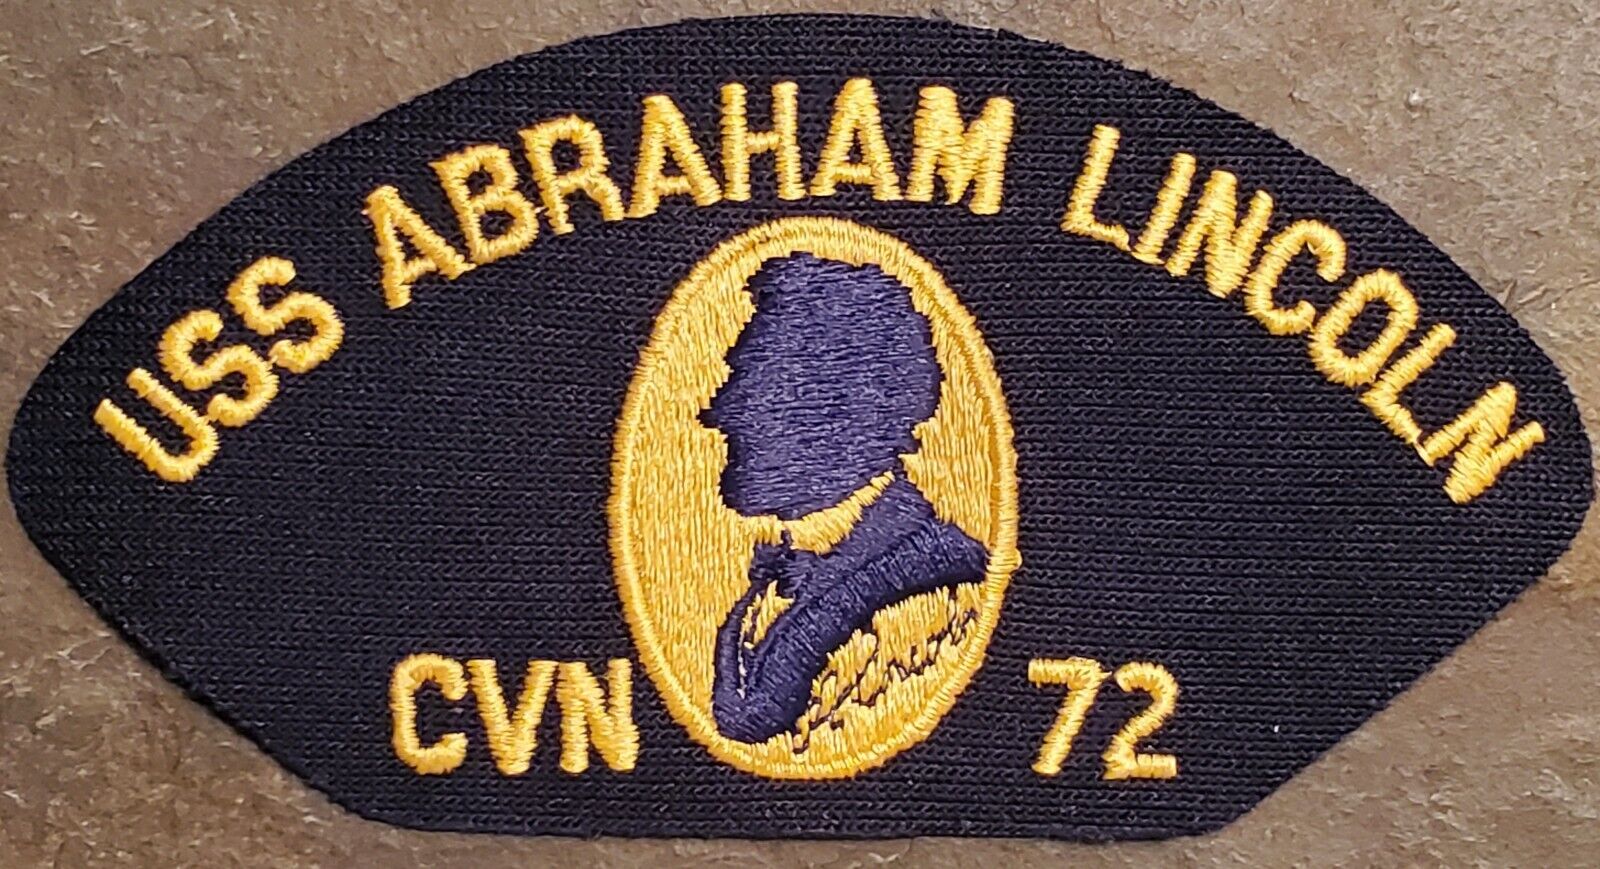 New USS ABRAHAM LINCOLN CVN-72 - Hat Patch Aircraft Carrier Ship US Navy USN #1